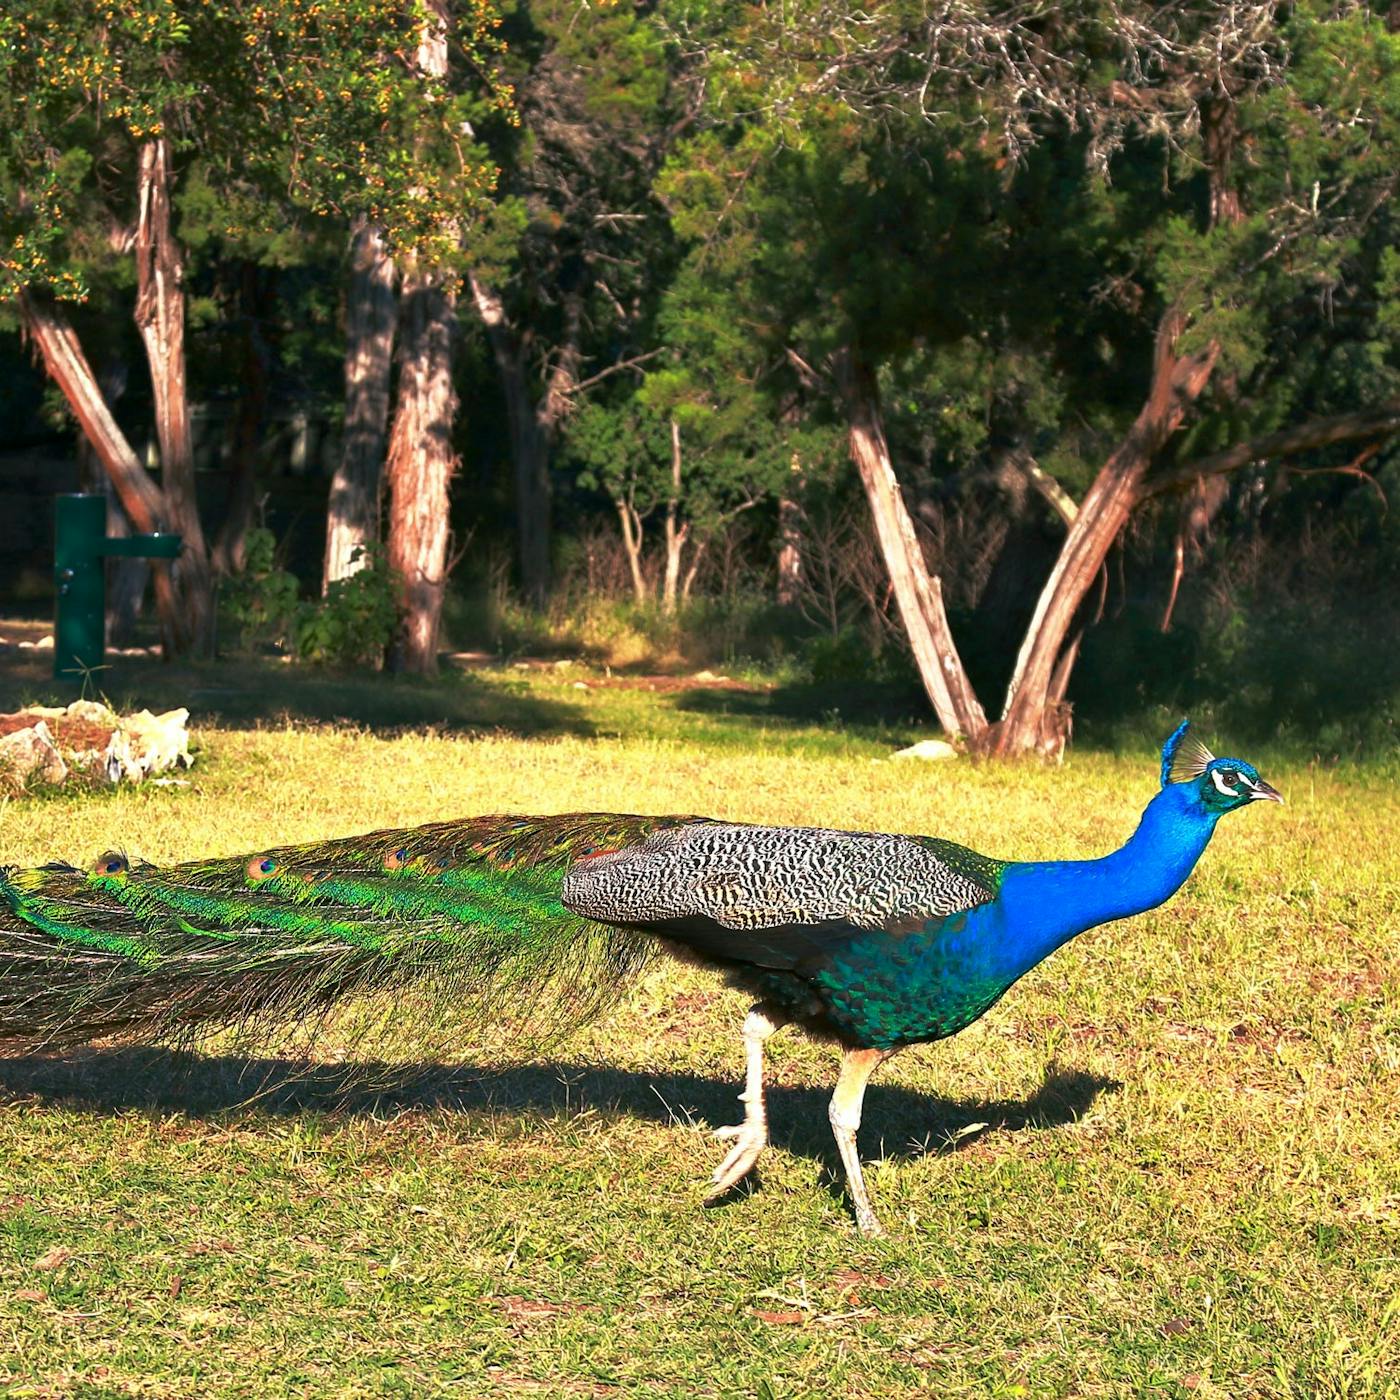 Why Do Abandoned Peacocks Keep Appearing in an Austin Park? – Texas Monthly